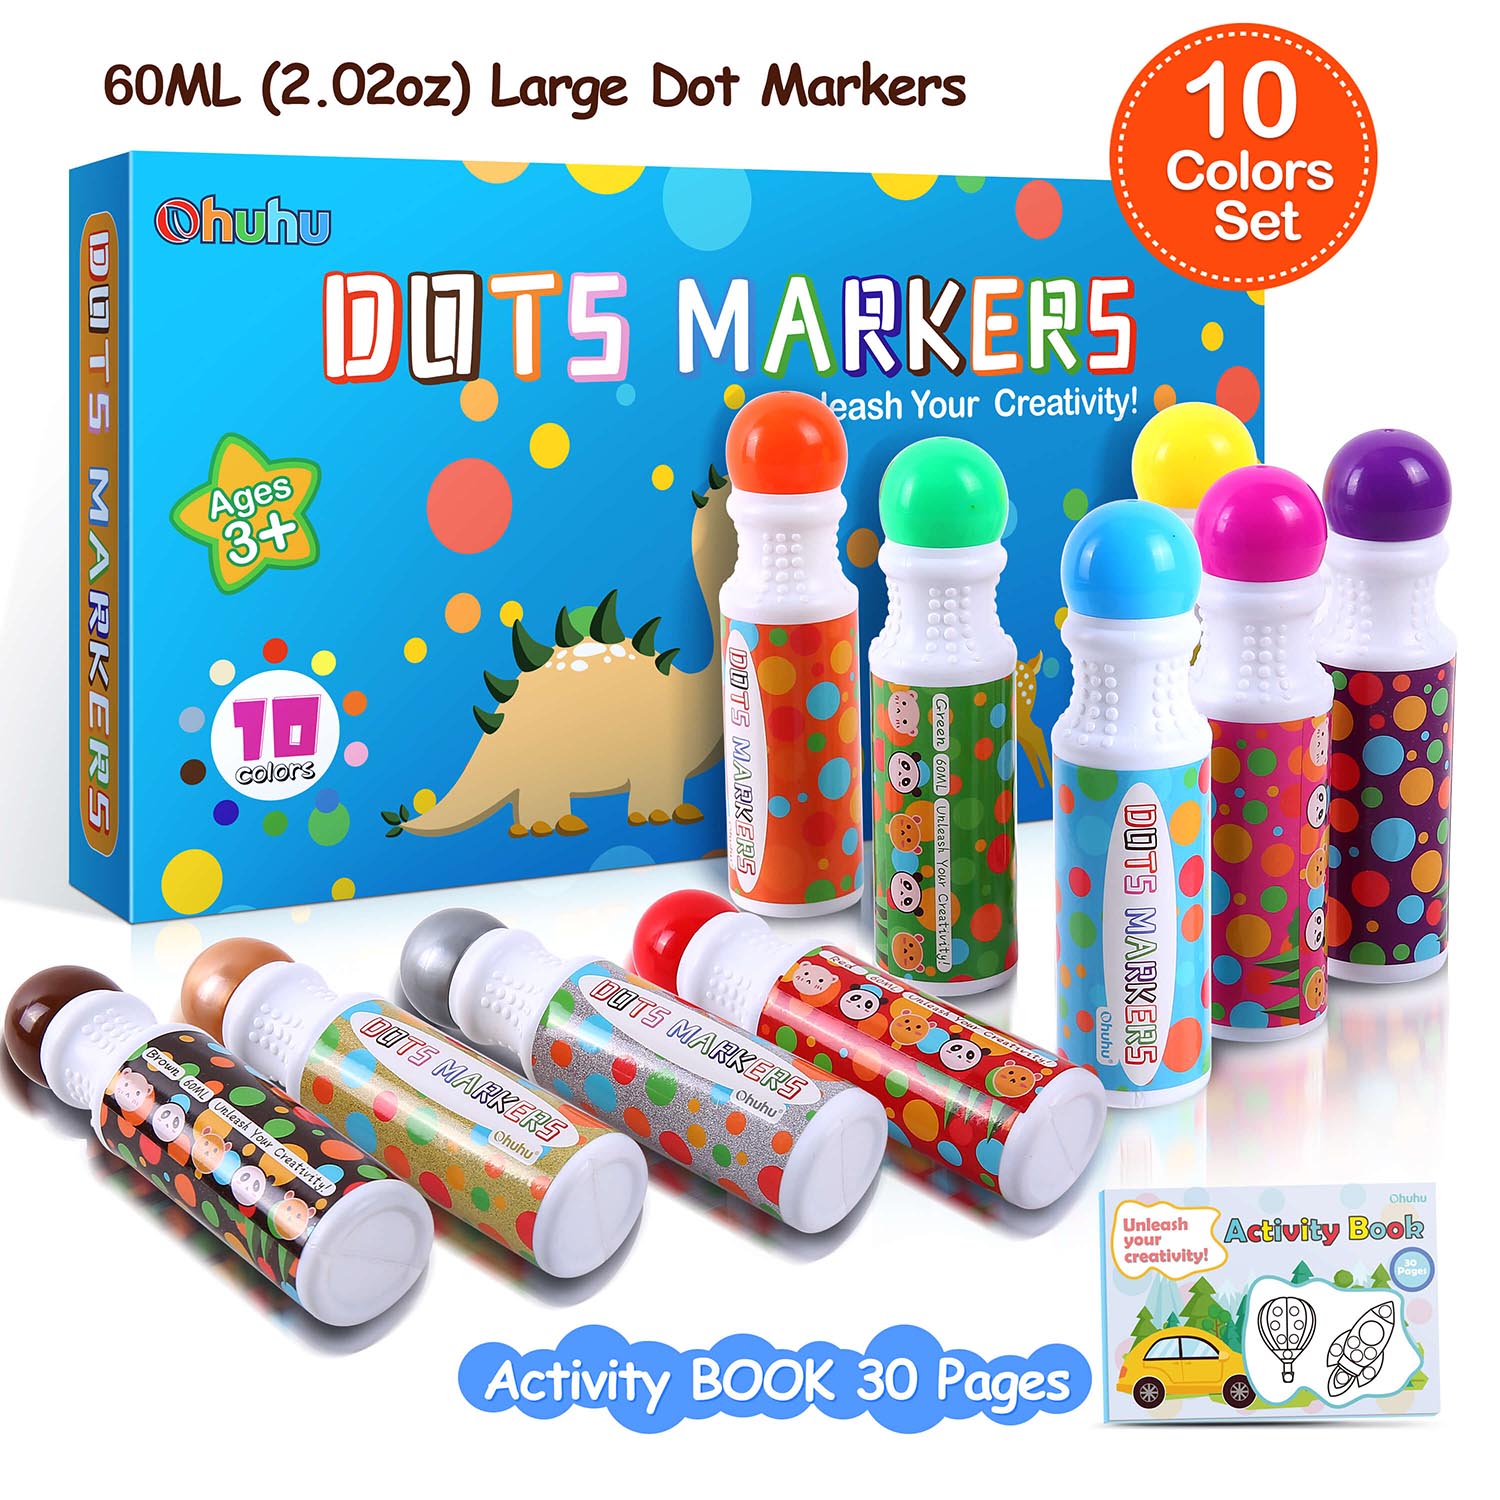 Dot Markers For Kids - Best Price in Singapore - Jan 2024